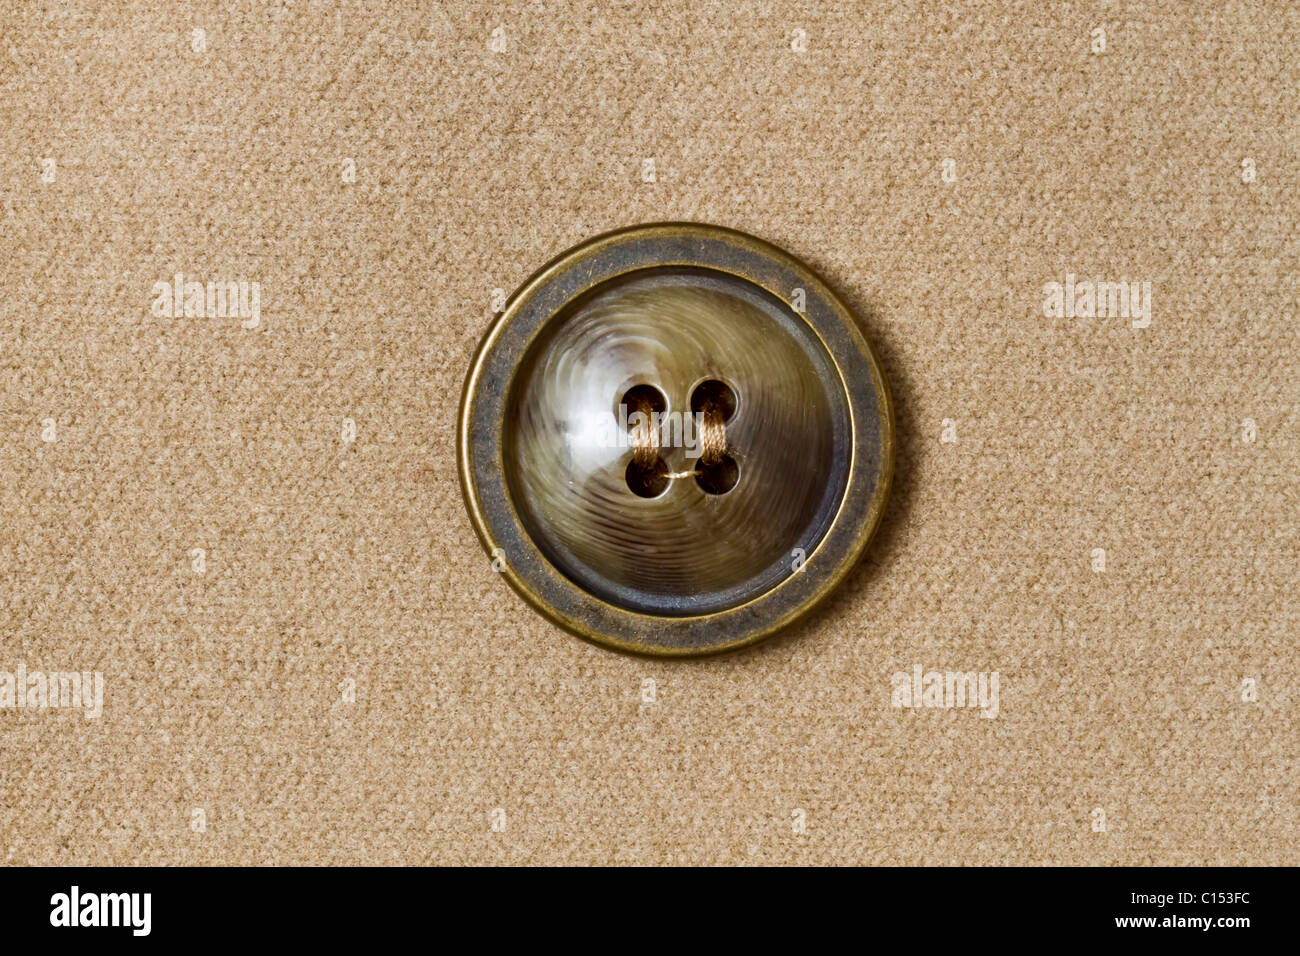 Big button fixed on fabric background Stock Photo